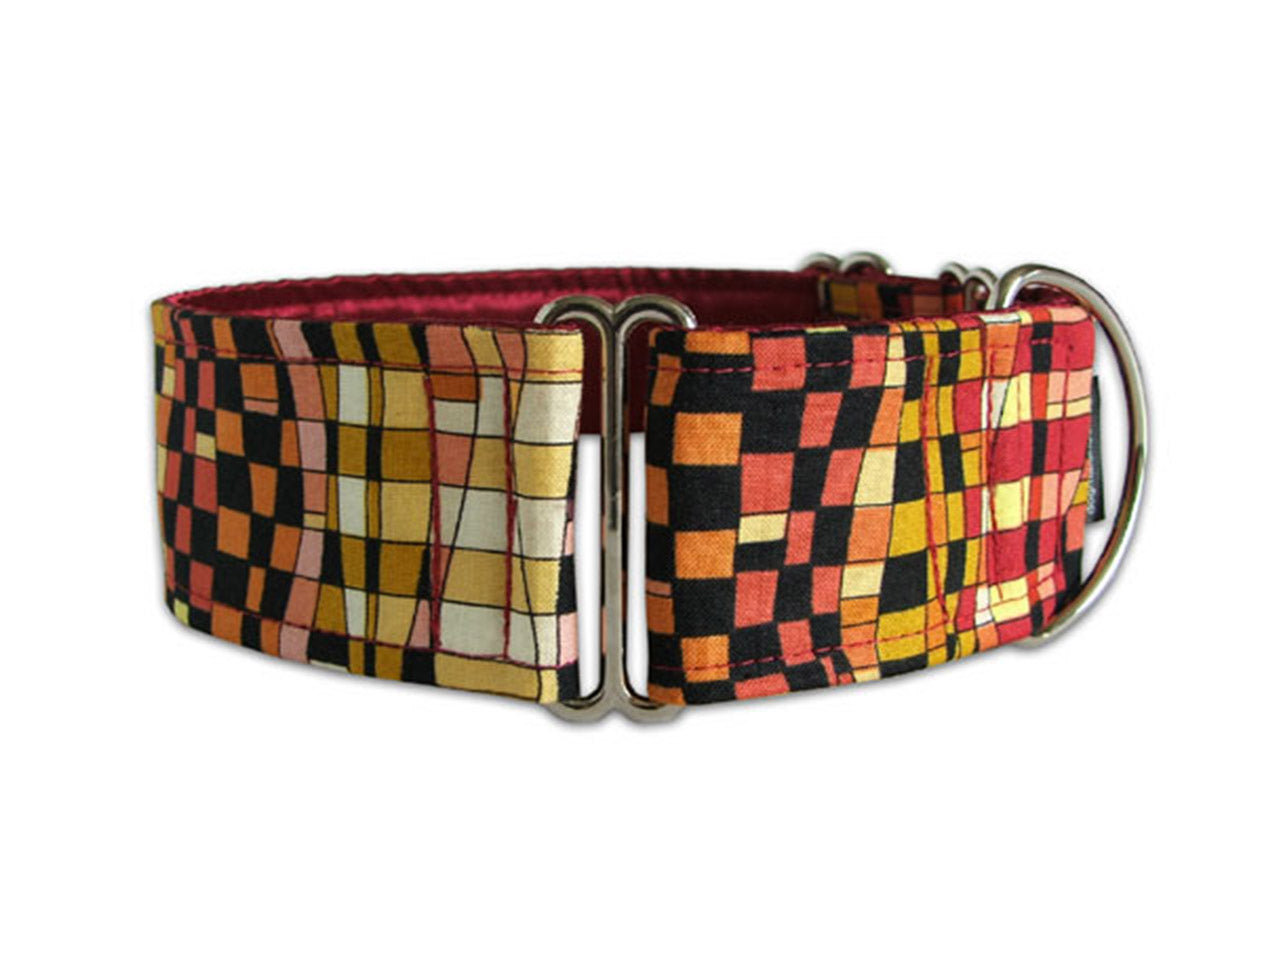 Funky check pattern in shades of red and black is cool for any pup with a bit of attitude!